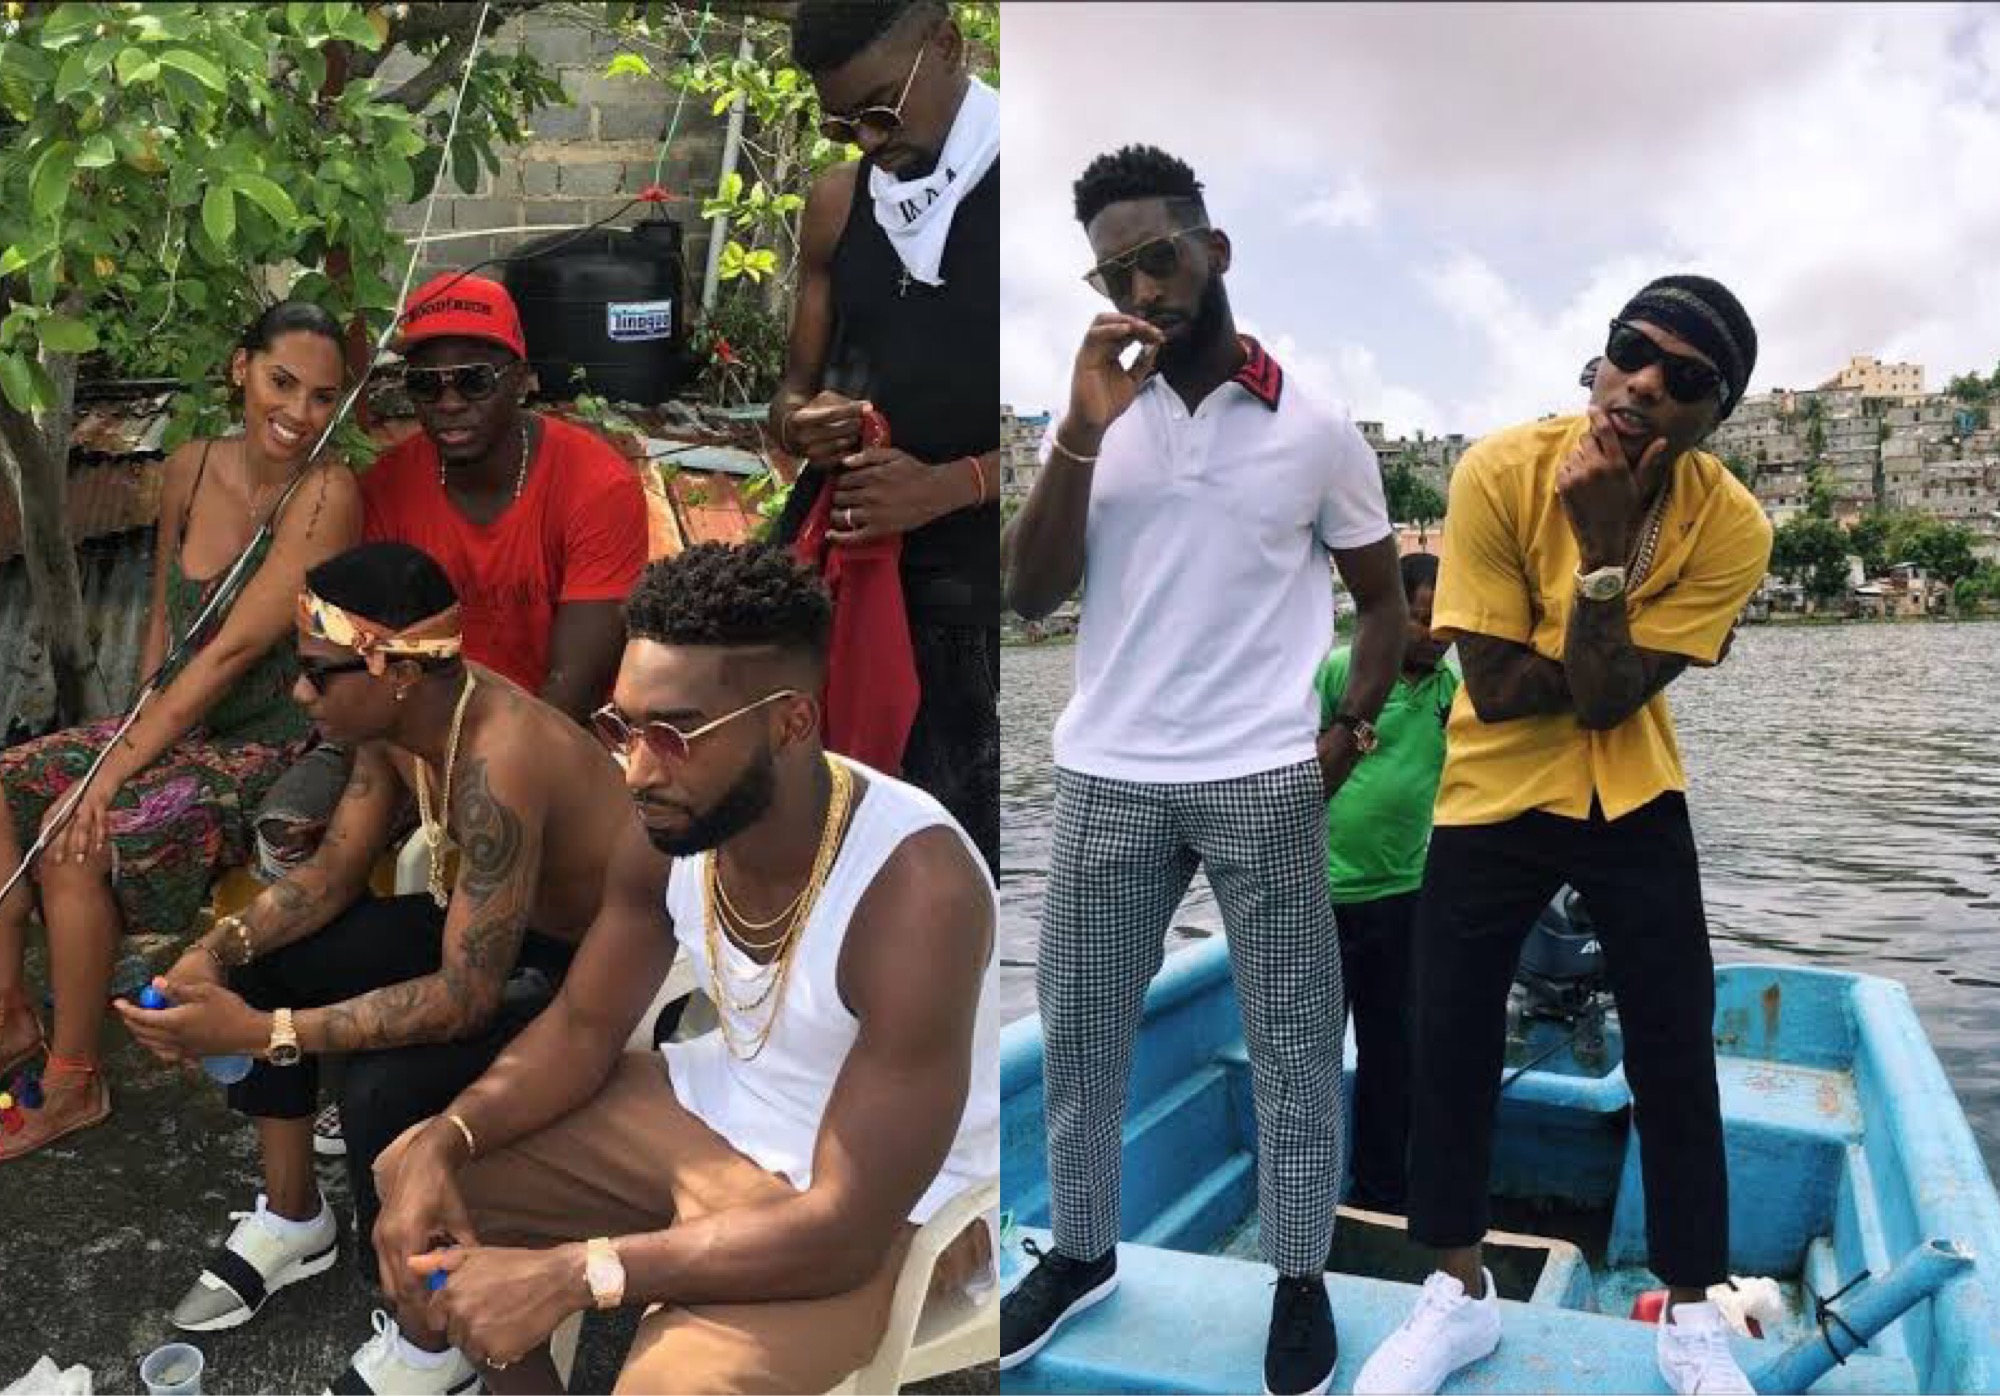 Wizkid Calls Out British Rapper, Tinie Tempah And His Manager Over Unpaid Debts